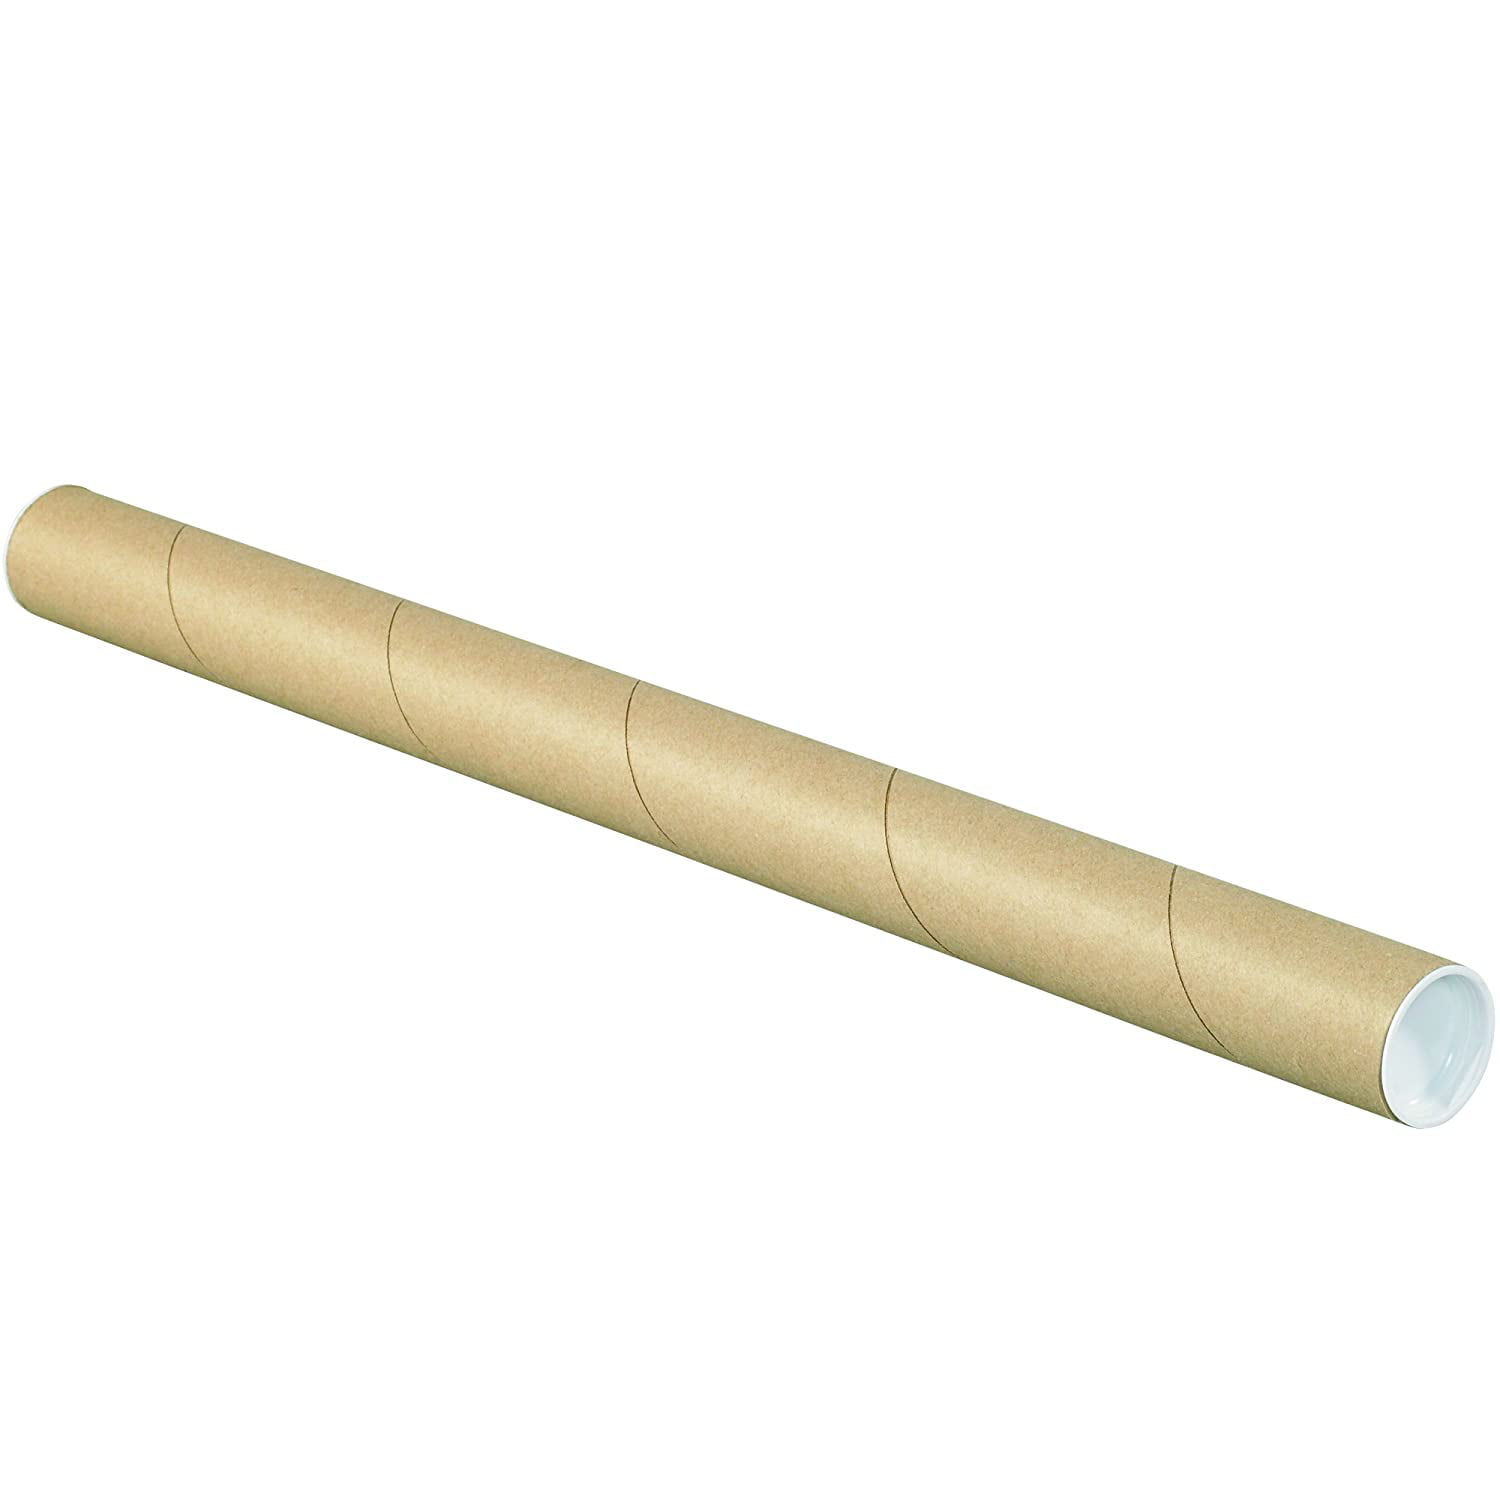 Partners Brand PP1506K Mailing Tubes with Caps 1-1/2 x 6 Kraft Pack of 50 